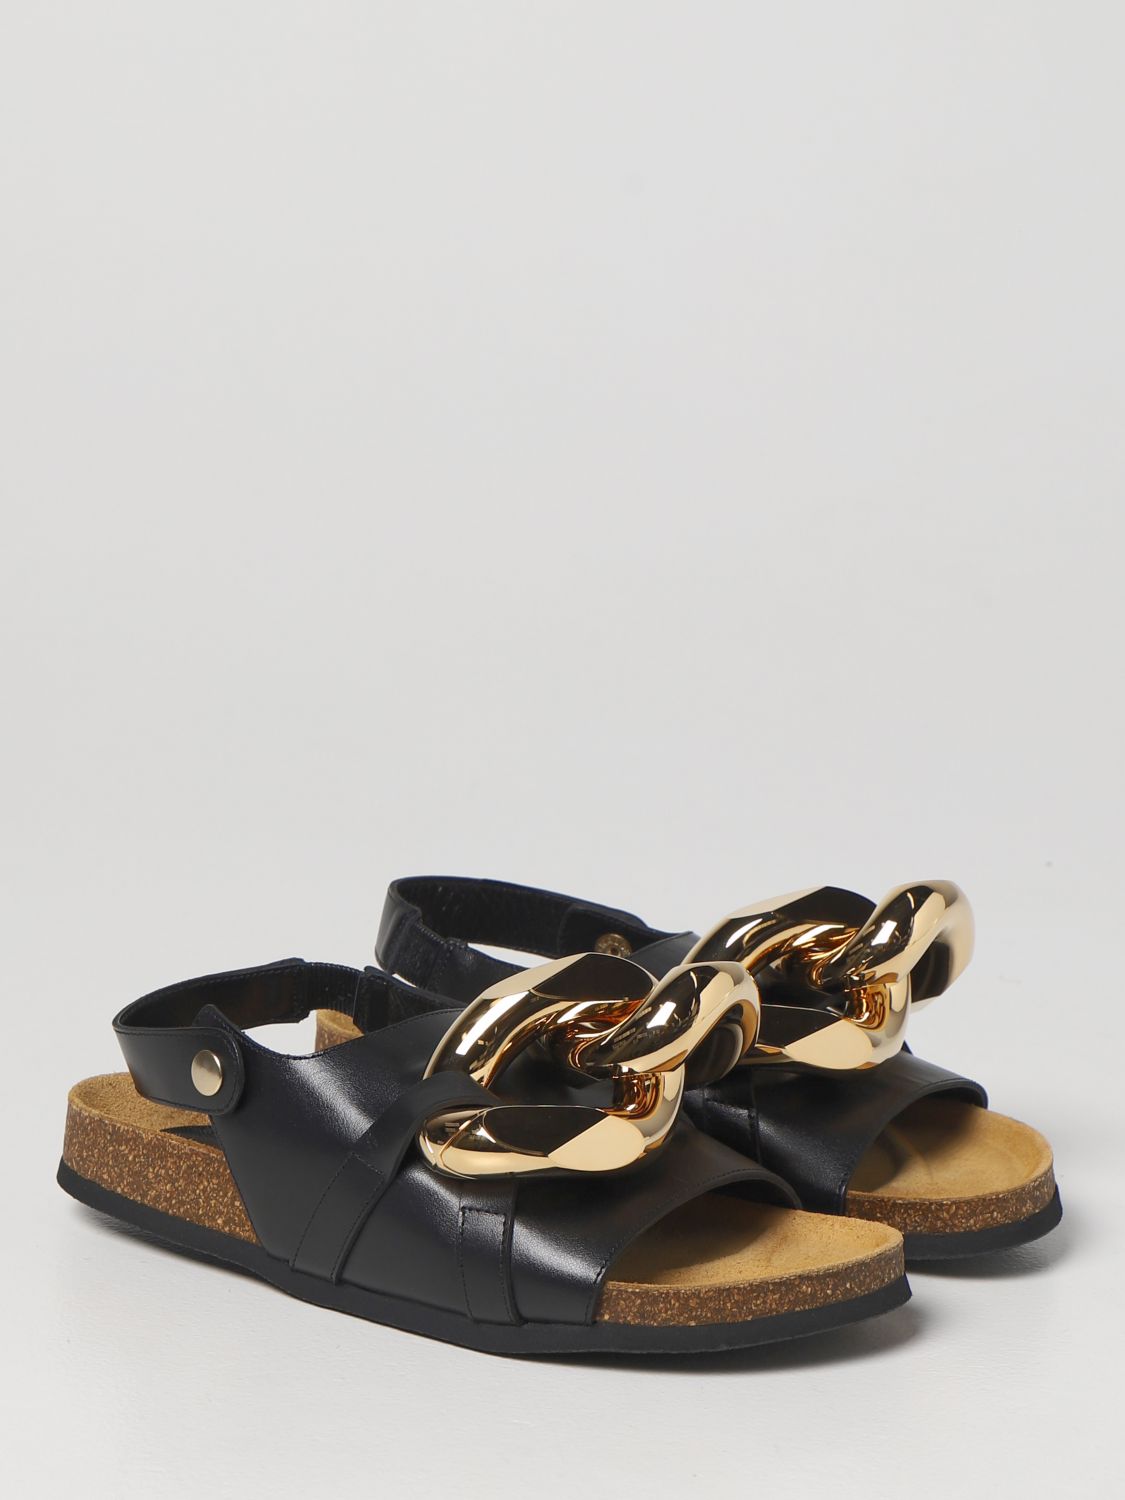 JW Anderson leather sandal with chain